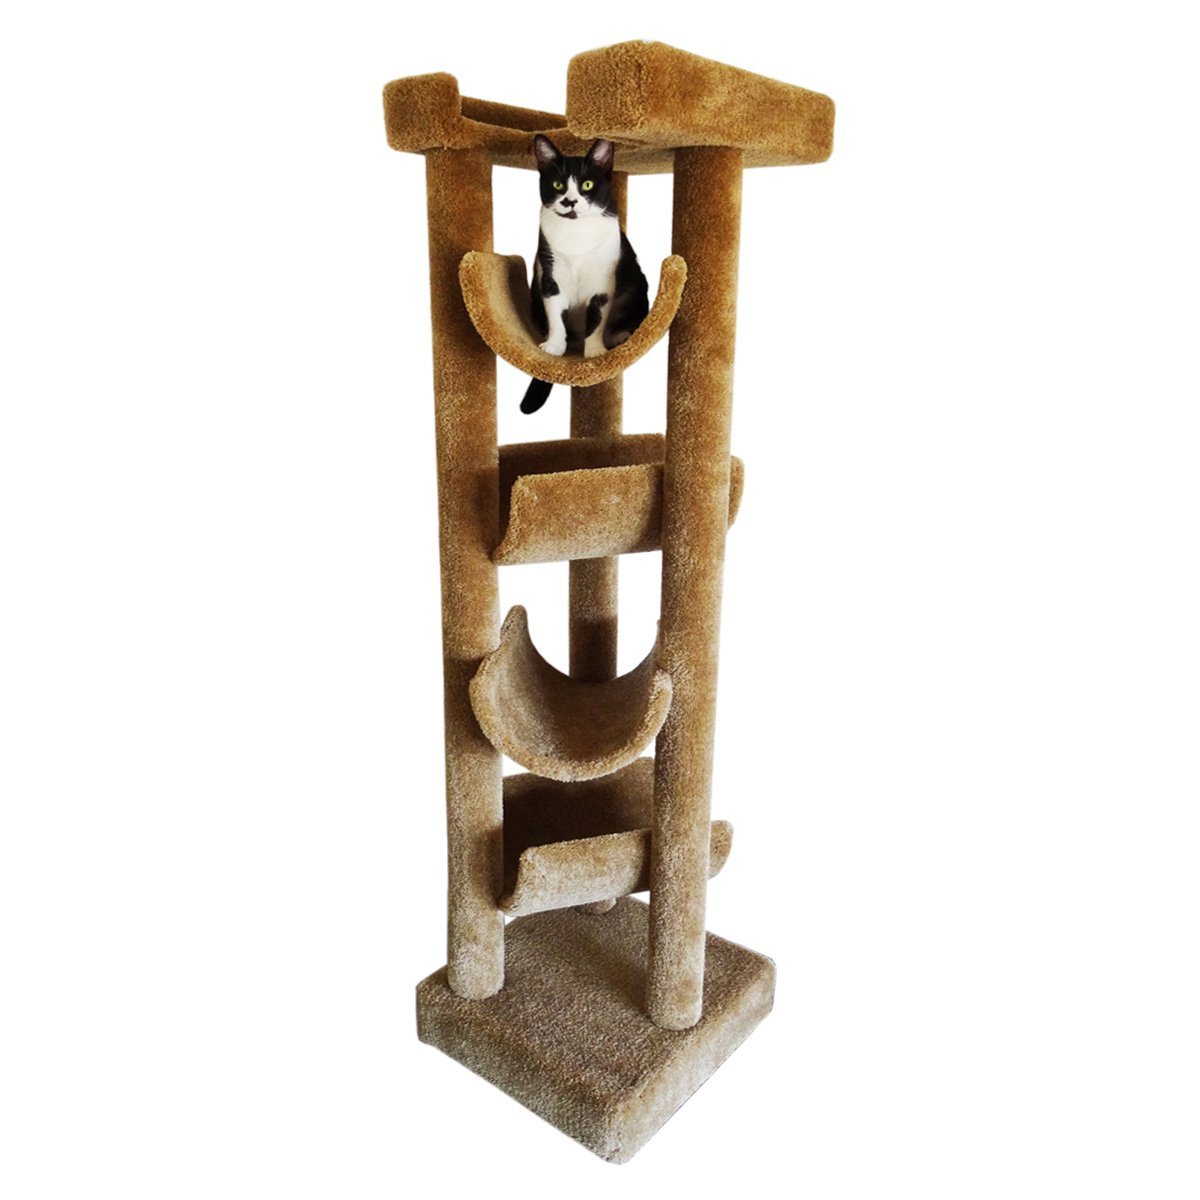 Five Level Half Tube Carpeted Cat Tree - This super cool 72 inch cat tower has a bumpered bed on top and four half tube platforms braced between it's three solid wood supports. Won't Tip! Has room for lots of kitties to play even large cats!